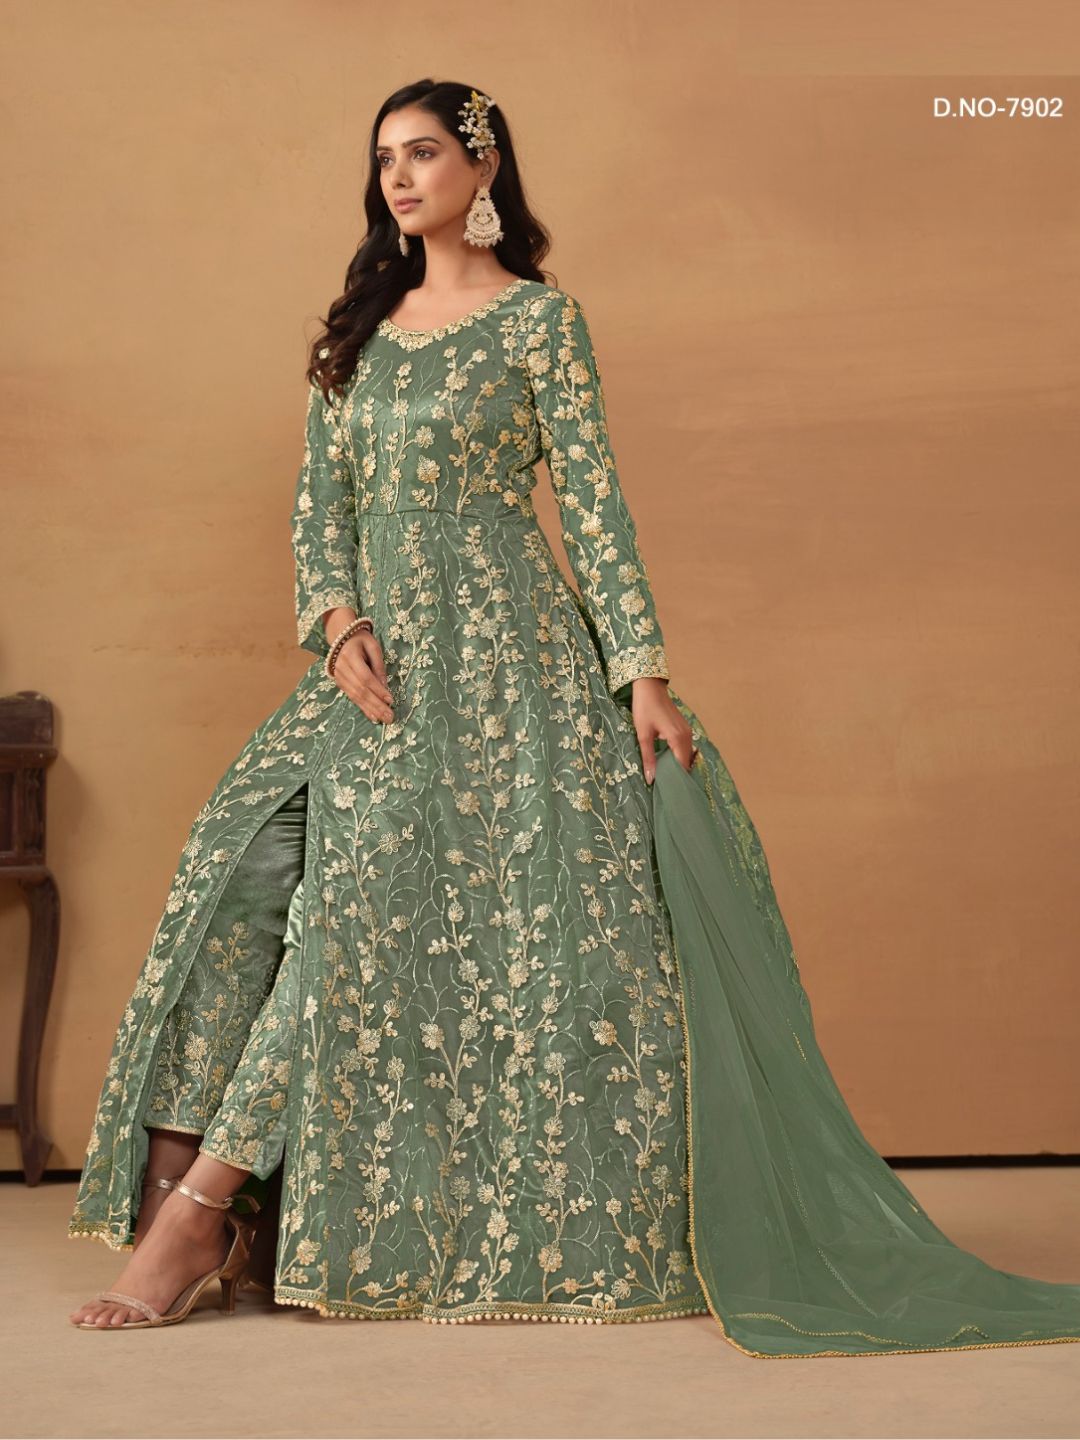 Net Embroidered Bollywood Salwar Kameez in green with Stone work-81994